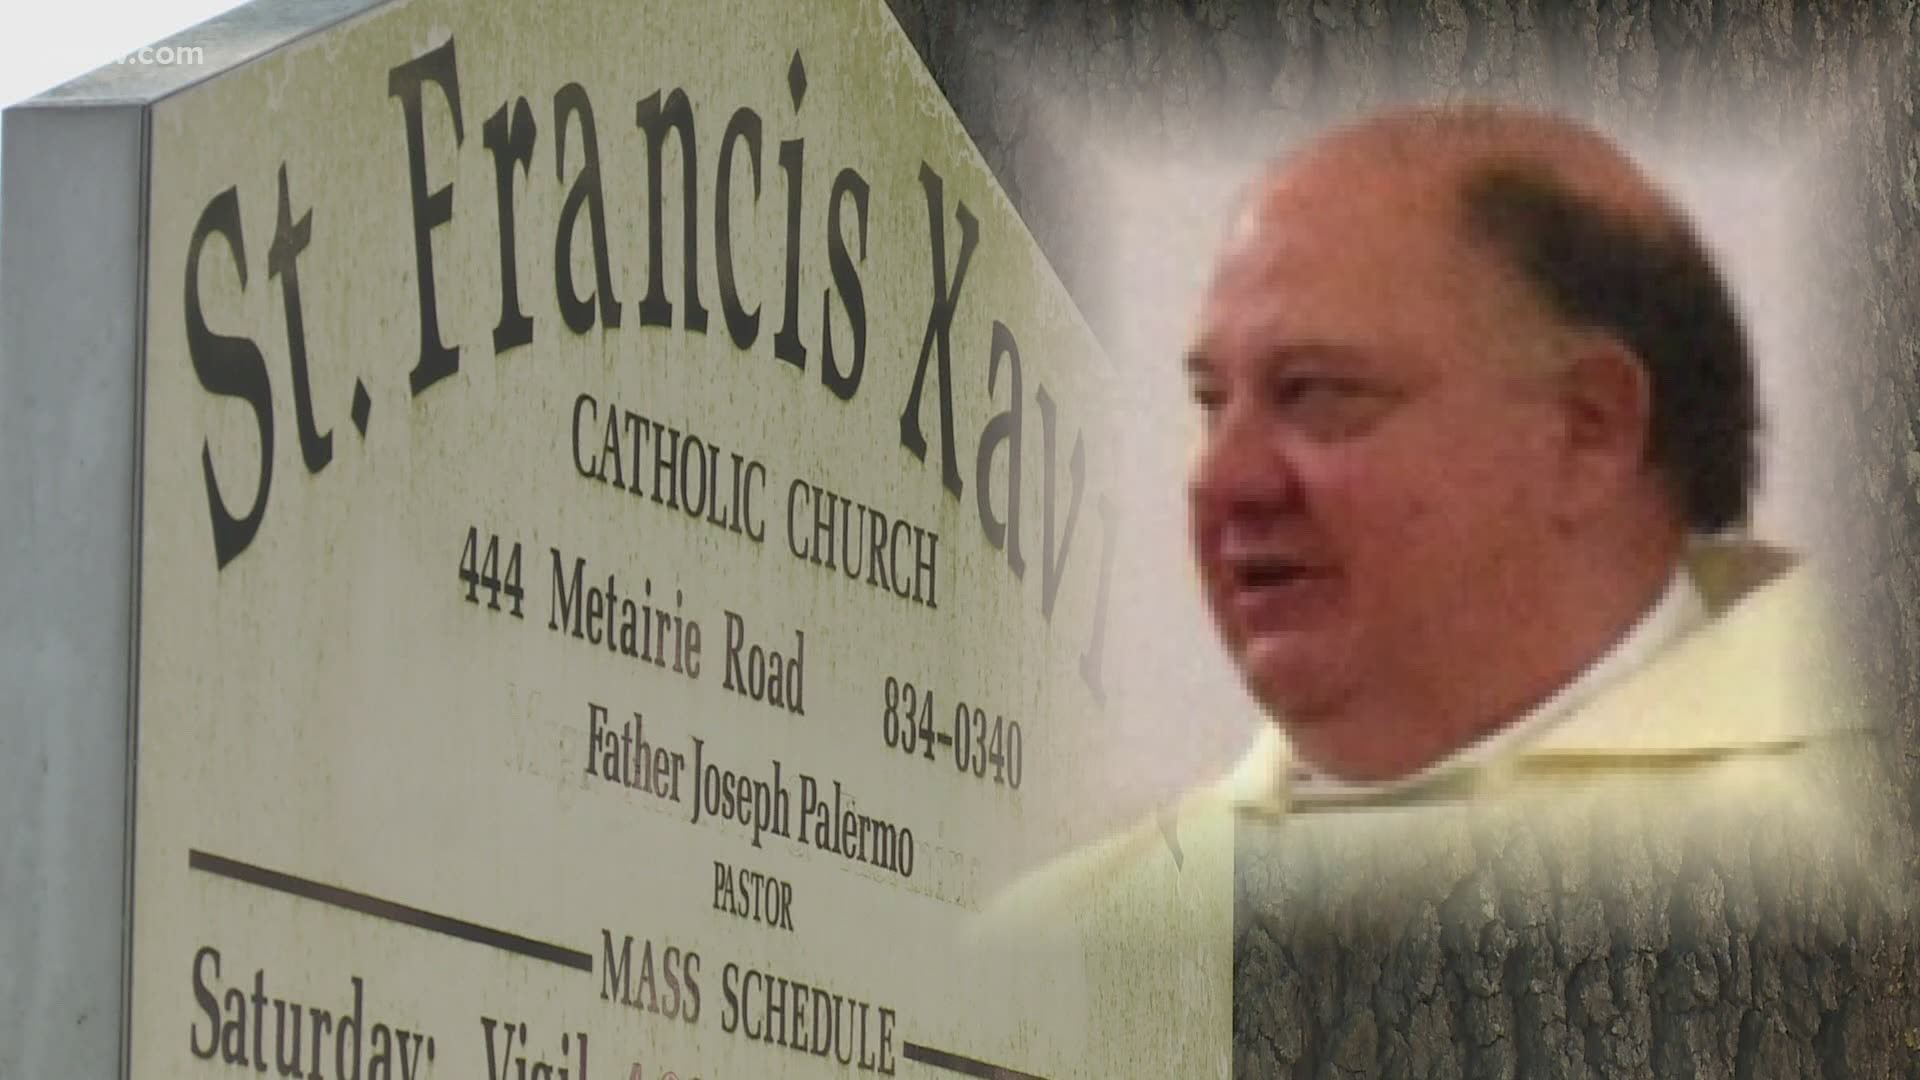 The formal abuse allegation has also been reported to officials of the Archdiocese of New Orleans within the past week.